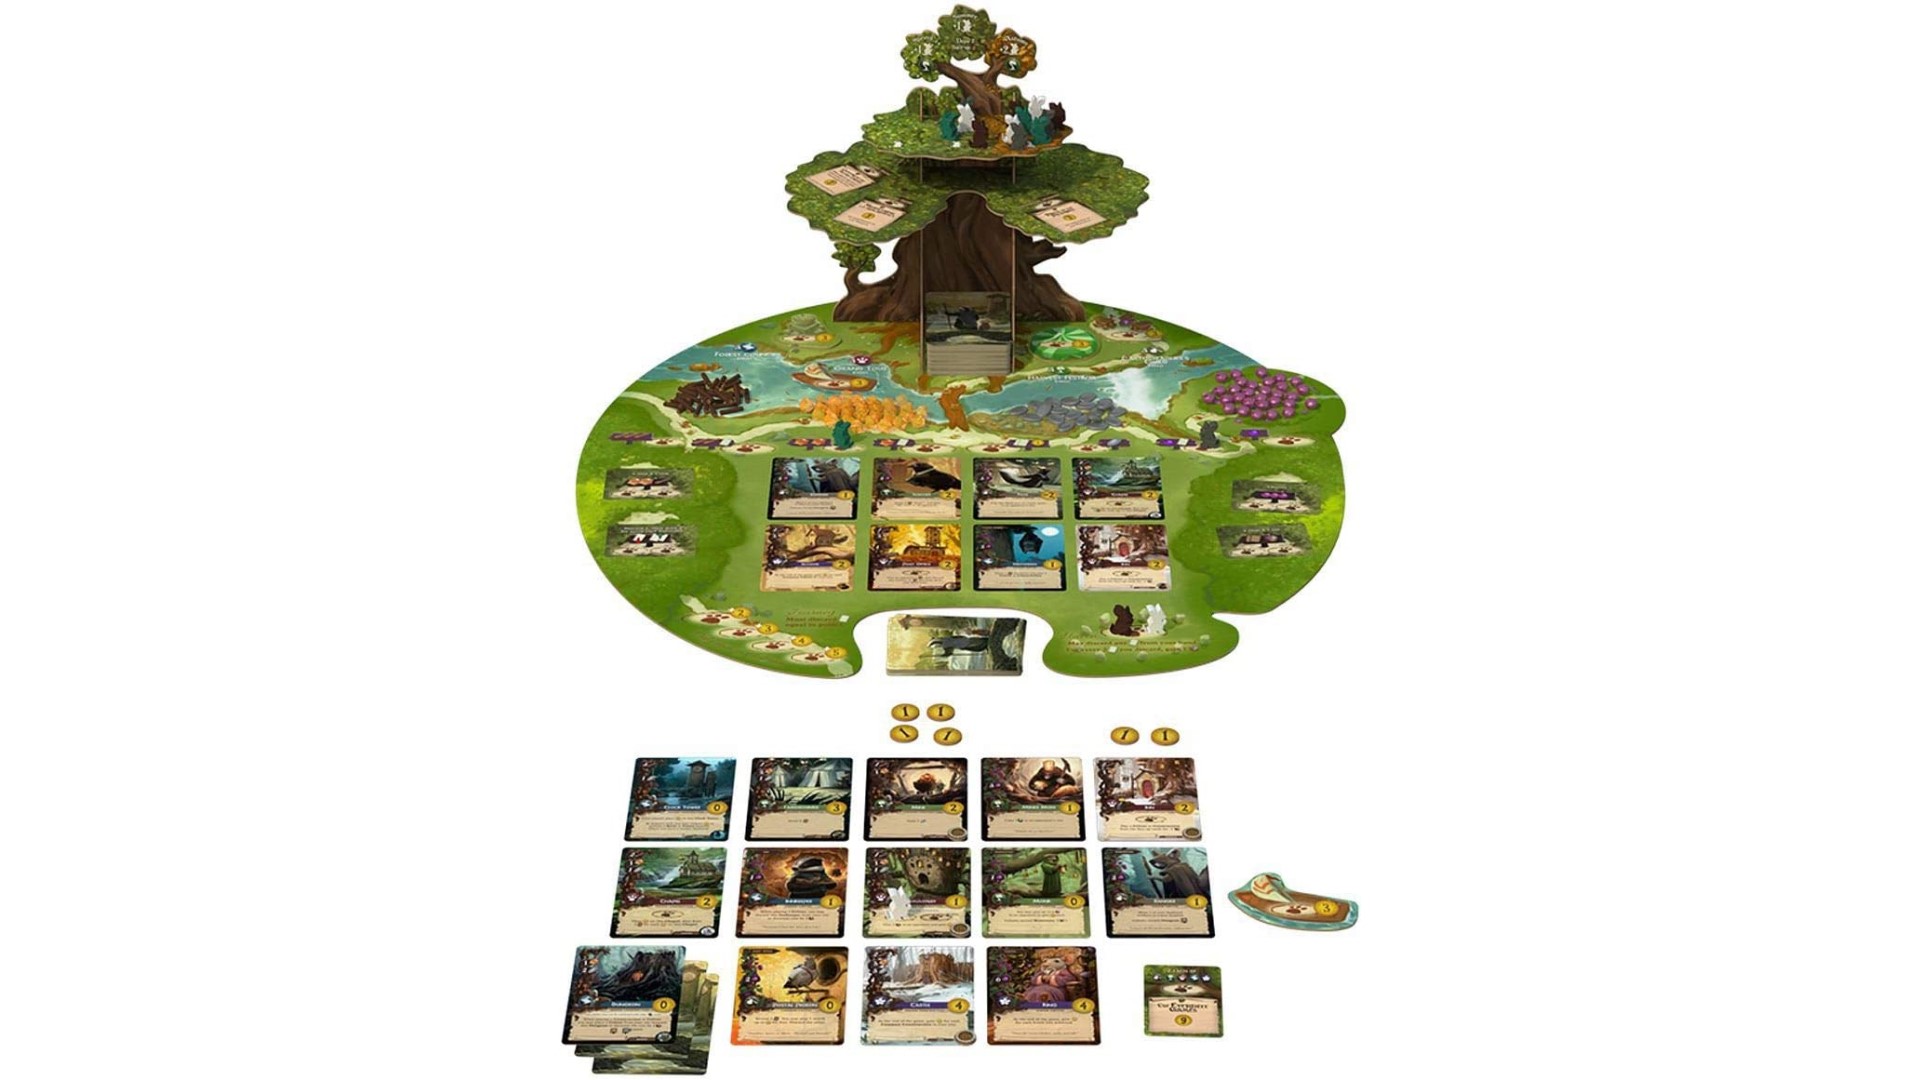 Meeple games - Everdell board, cards and meeples set up